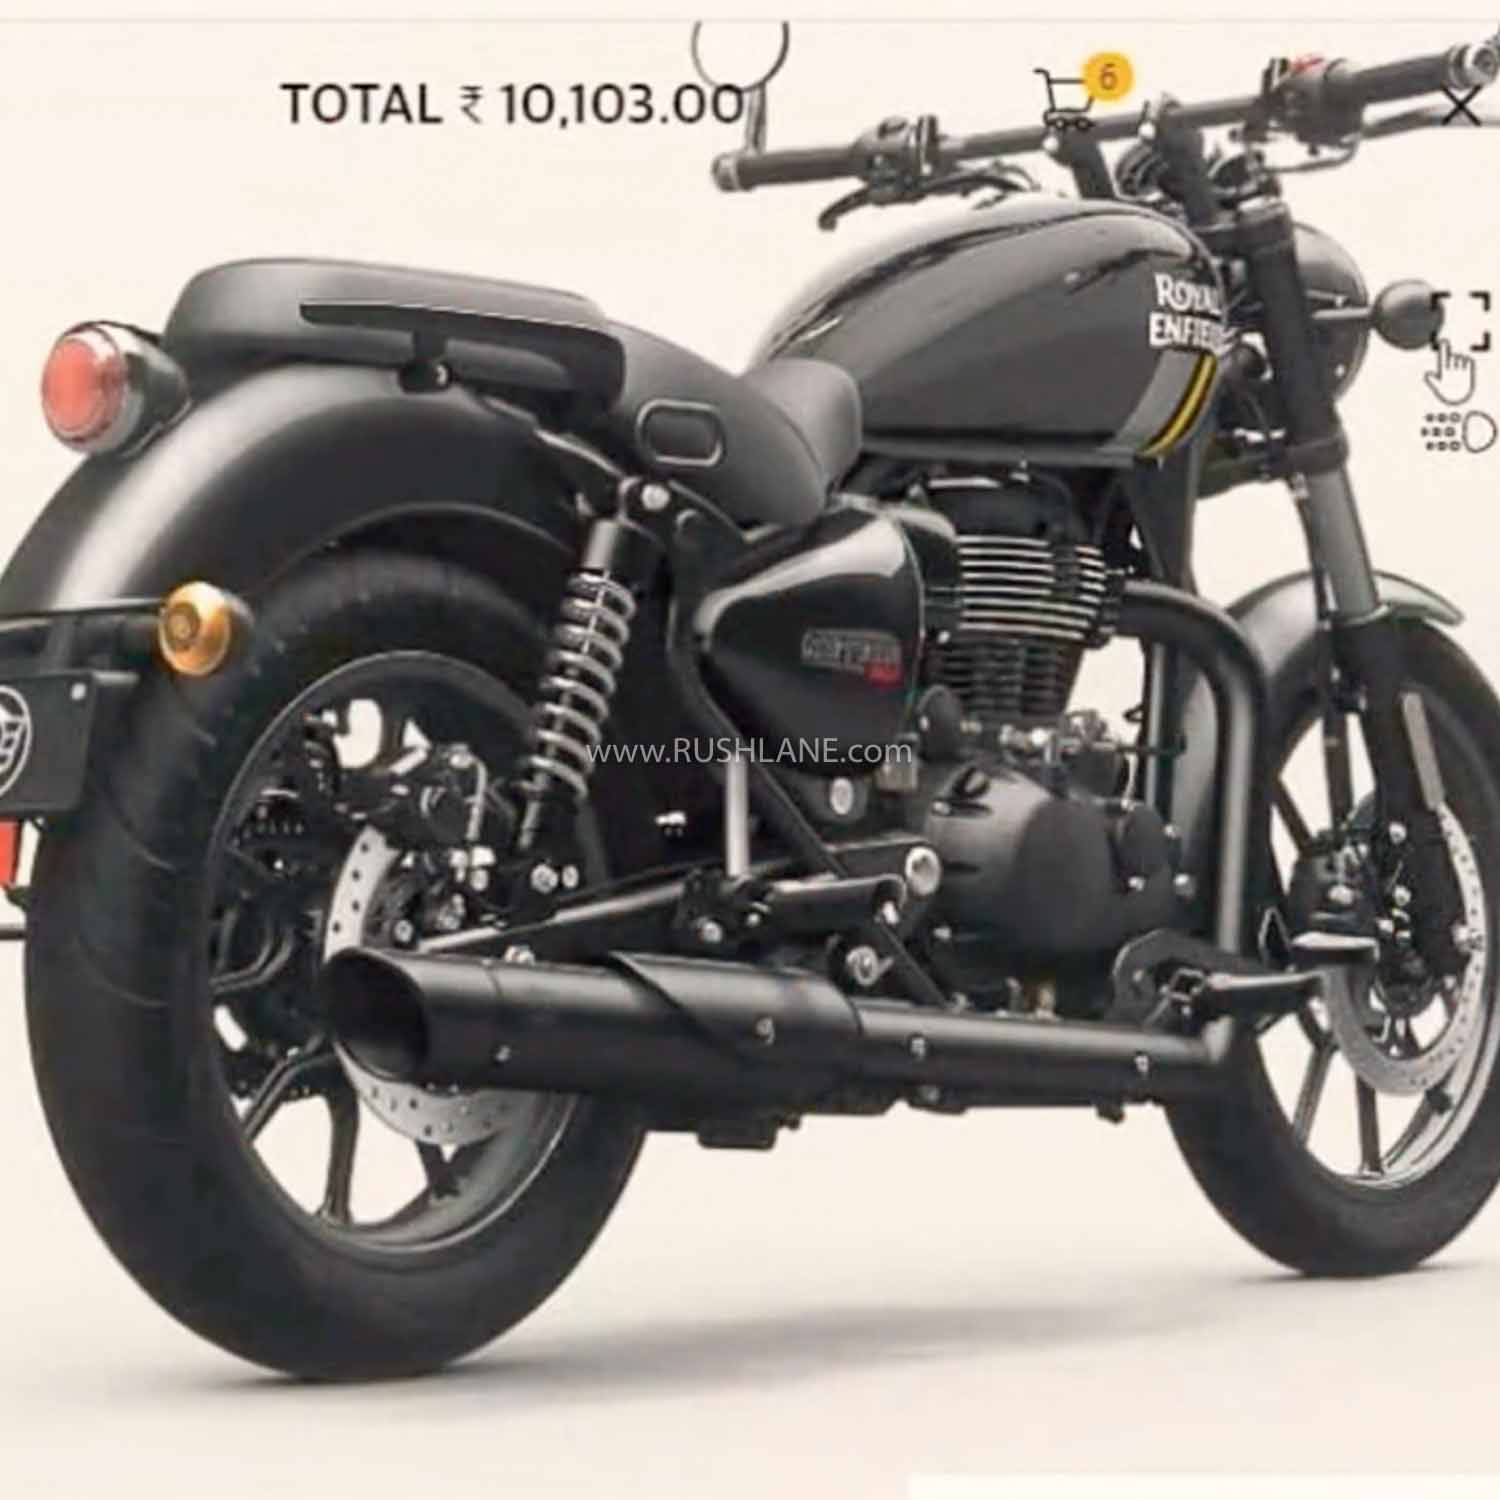 Accessorized Version of Royal Enfield Meteor 350